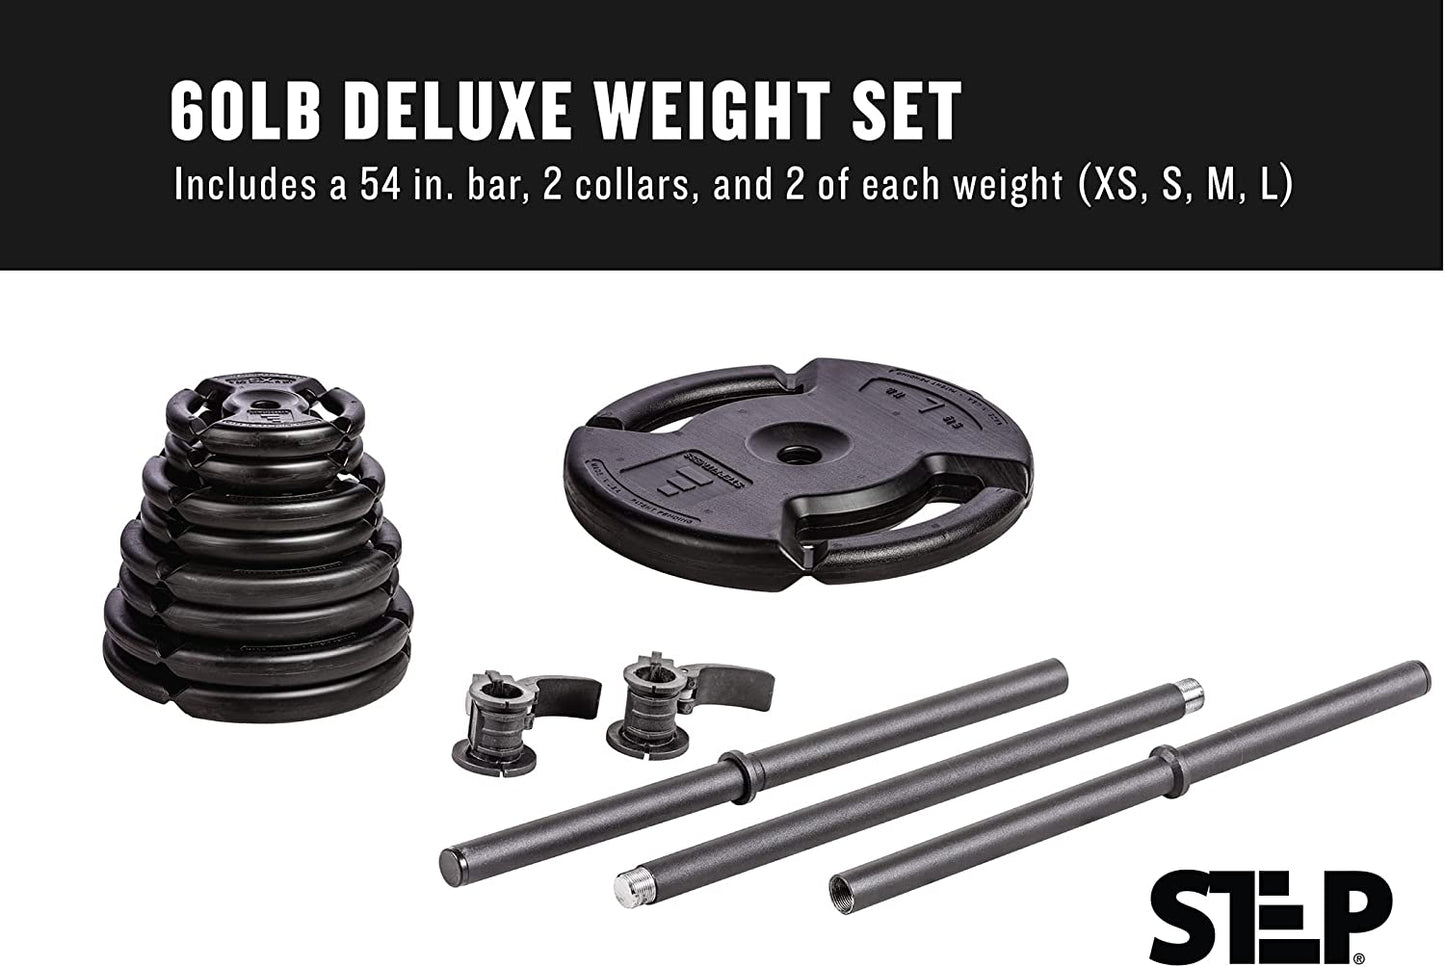 Deluxe Barbell Weight Set, 60 lbs with Bar, Collars, and Weights